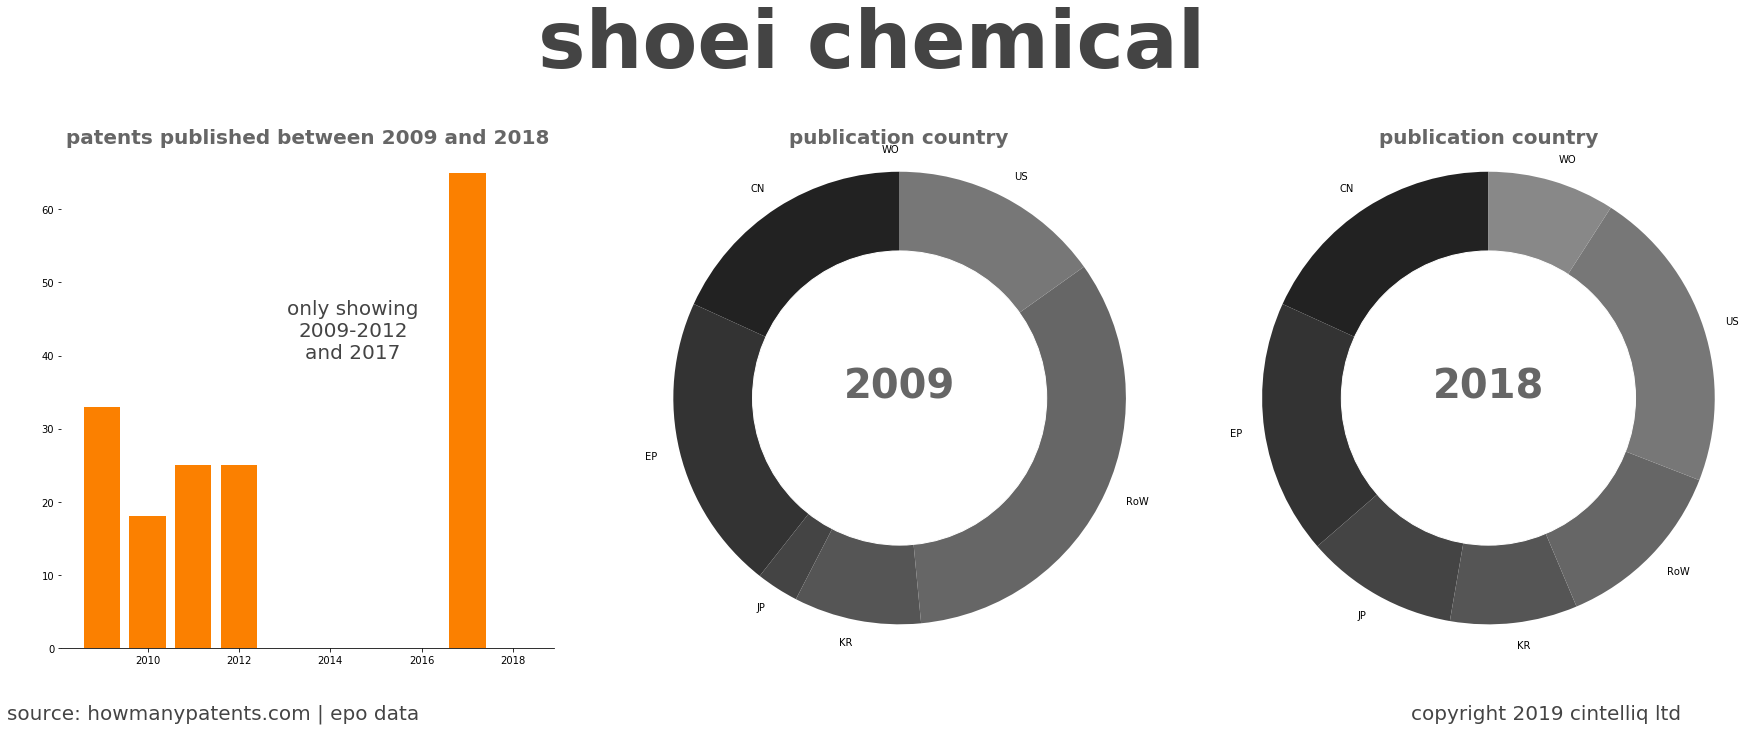 summary of patents for Shoei Chemical